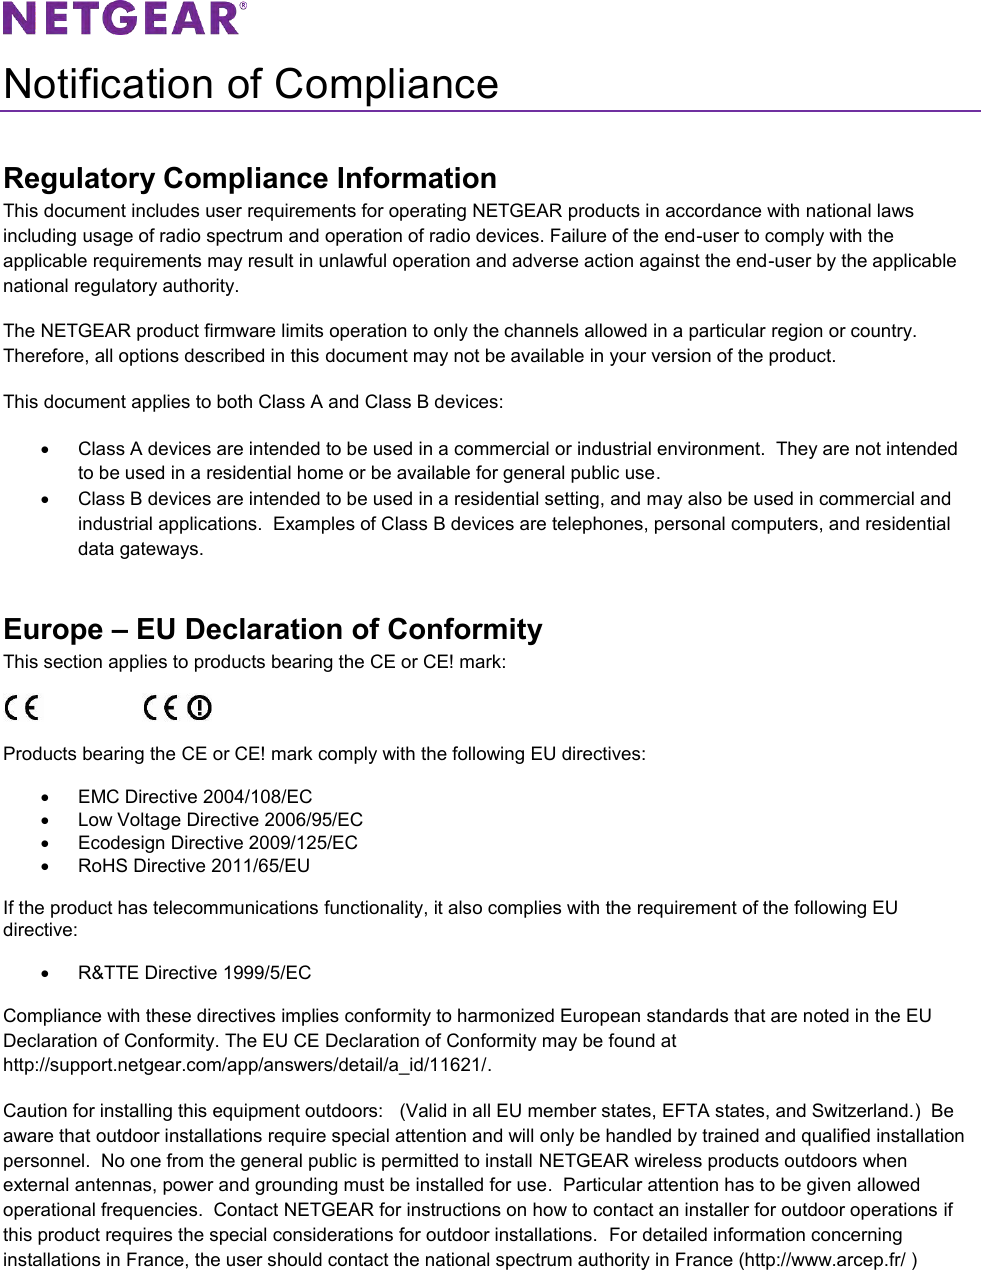   Notification of Compliance Regulatory Compliance Information This document includes user requirements for operating NETGEAR products in accordance with national laws including usage of radio spectrum and operation of radio devices. Failure of the end-user to comply with the applicable requirements may result in unlawful operation and adverse action against the end-user by the applicable national regulatory authority. The NETGEAR product firmware limits operation to only the channels allowed in a particular region or country. Therefore, all options described in this document may not be available in your version of the product. This document applies to both Class A and Class B devices:   Class A devices are intended to be used in a commercial or industrial environment.  They are not intended to be used in a residential home or be available for general public use.   Class B devices are intended to be used in a residential setting, and may also be used in commercial and industrial applications.  Examples of Class B devices are telephones, personal computers, and residential data gateways. Europe – EU Declaration of Conformity This section applies to products bearing the CE or CE! mark:                      Products bearing the CE or CE! mark comply with the following EU directives:   EMC Directive 2004/108/EC   Low Voltage Directive 2006/95/EC   Ecodesign Directive 2009/125/EC   RoHS Directive 2011/65/EU If the product has telecommunications functionality, it also complies with the requirement of the following EU directive:   R&amp;TTE Directive 1999/5/EC Compliance with these directives implies conformity to harmonized European standards that are noted in the EU Declaration of Conformity. The EU CE Declaration of Conformity may be found at http://support.netgear.com/app/answers/detail/a_id/11621/. Caution for installing this equipment outdoors:   (Valid in all EU member states, EFTA states, and Switzerland.)  Be aware that outdoor installations require special attention and will only be handled by trained and qualified installation personnel.  No one from the general public is permitted to install NETGEAR wireless products outdoors when external antennas, power and grounding must be installed for use.  Particular attention has to be given allowed operational frequencies.  Contact NETGEAR for instructions on how to contact an installer for outdoor operations if this product requires the special considerations for outdoor installations.  For detailed information concerning installations in France, the user should contact the national spectrum authority in France (http://www.arcep.fr/ ) 